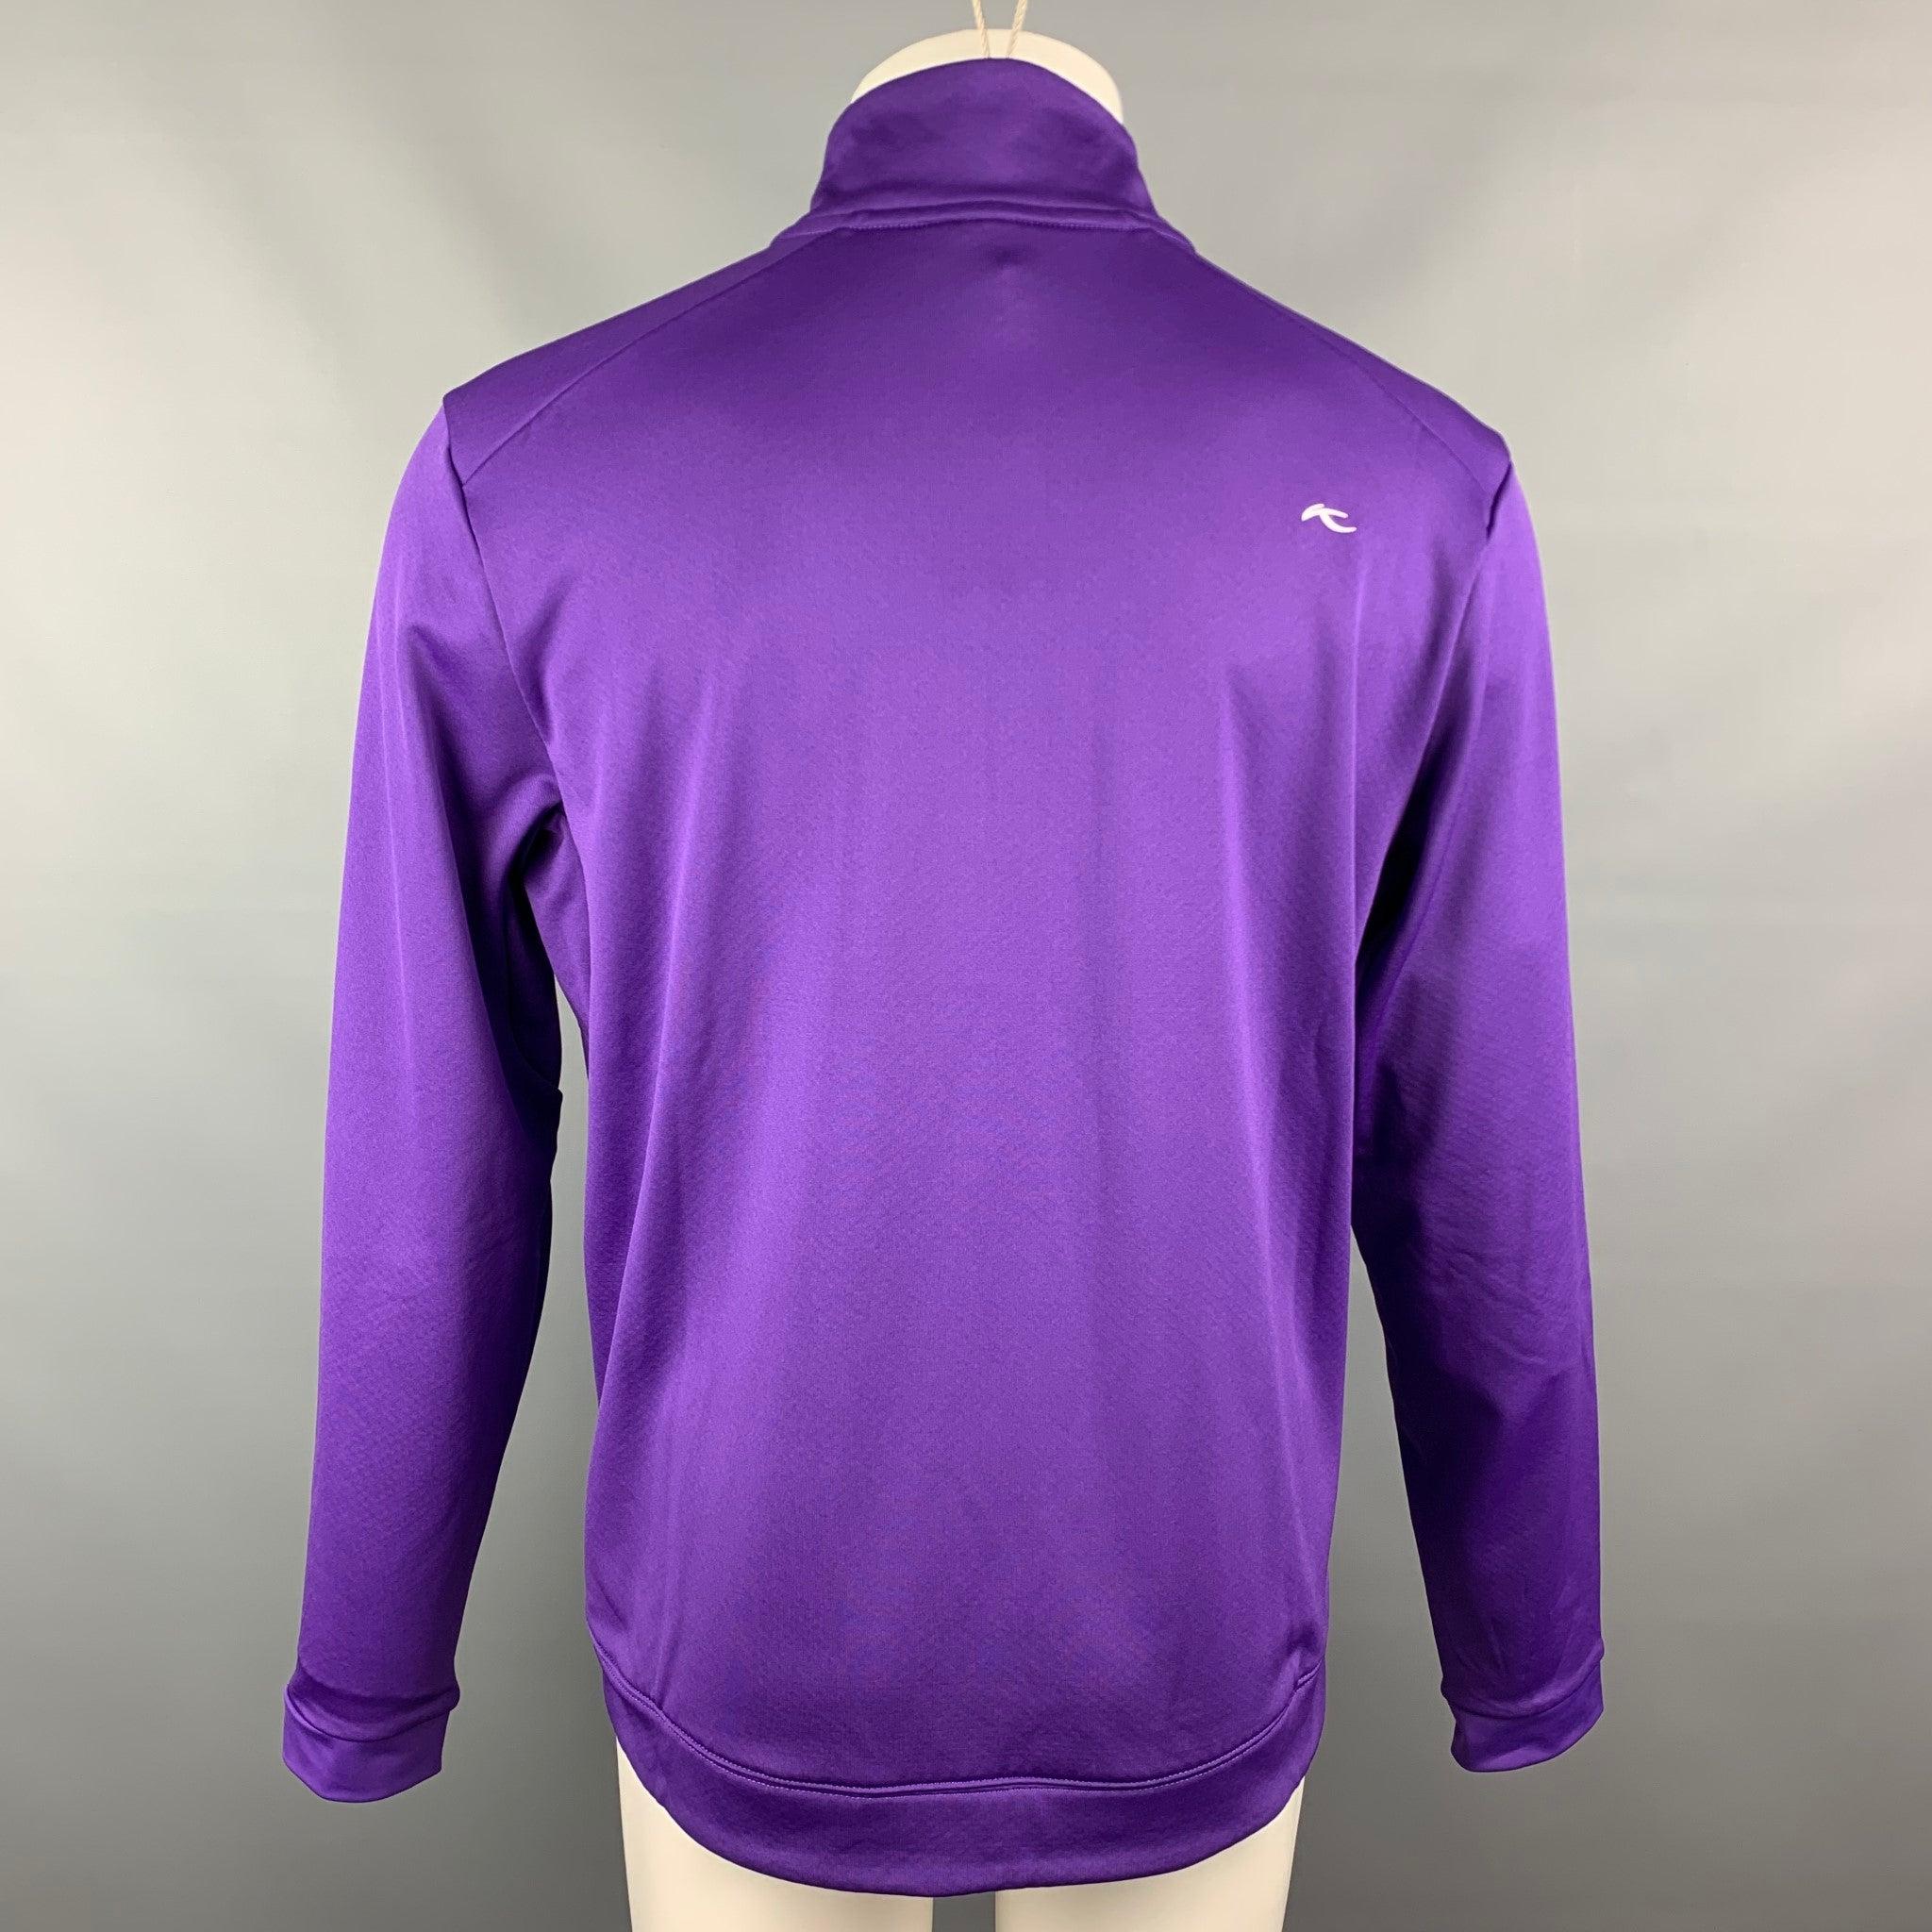 KJUS Size M Purple Polyester Zip Up Diamond Fleece Jacket In Good Condition For Sale In San Francisco, CA